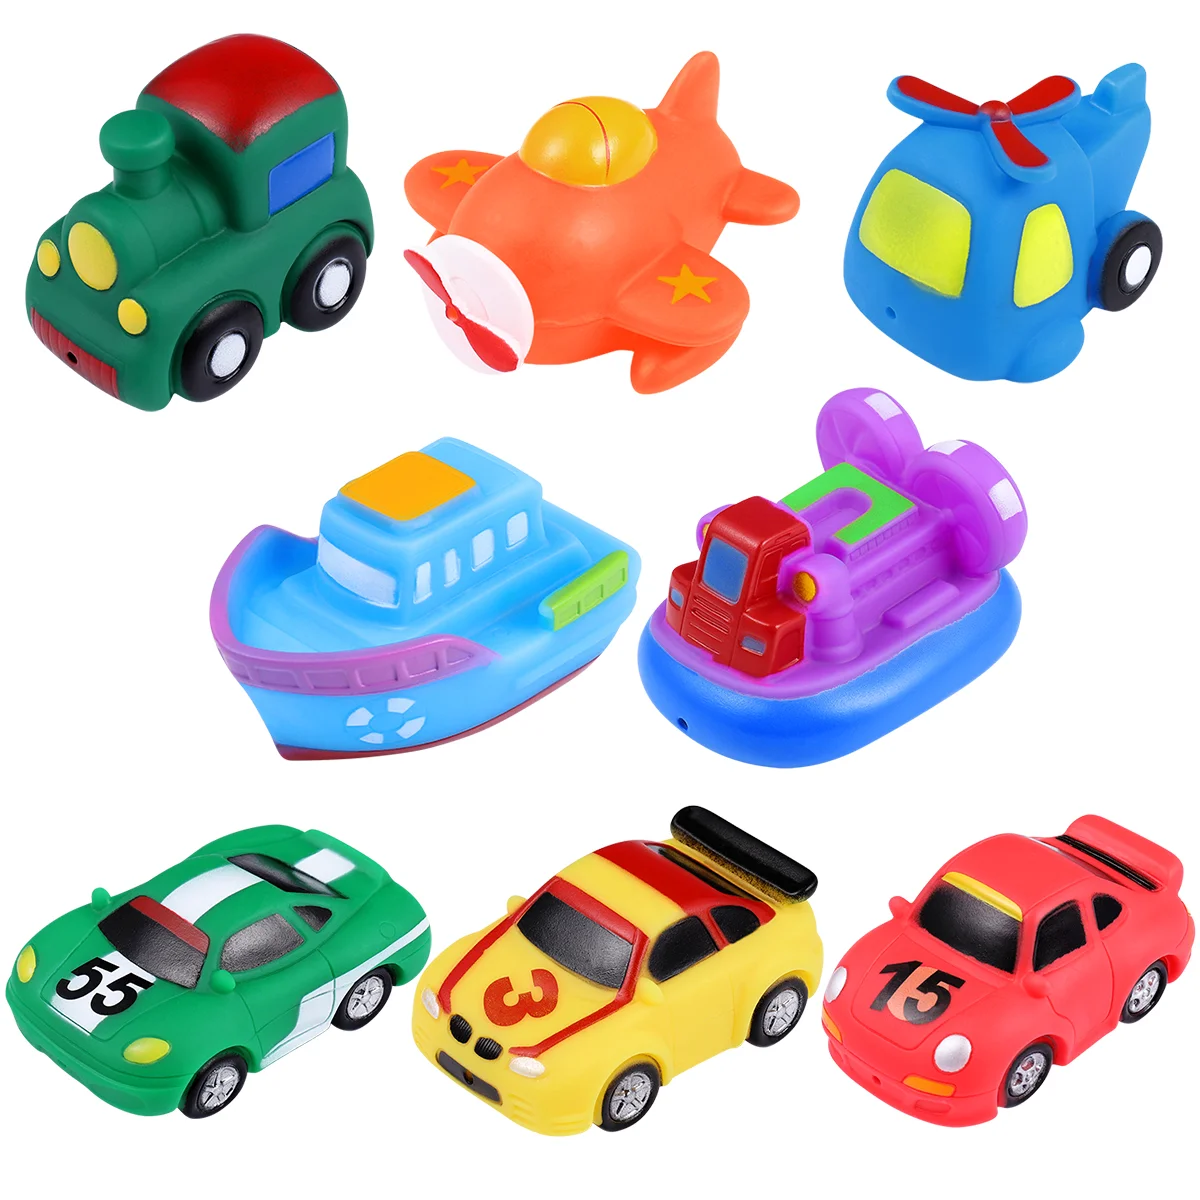 

Squeeze Sound Bath Toy Vehicle Bathing Toys Bathtime for Toddlers Floating Kids